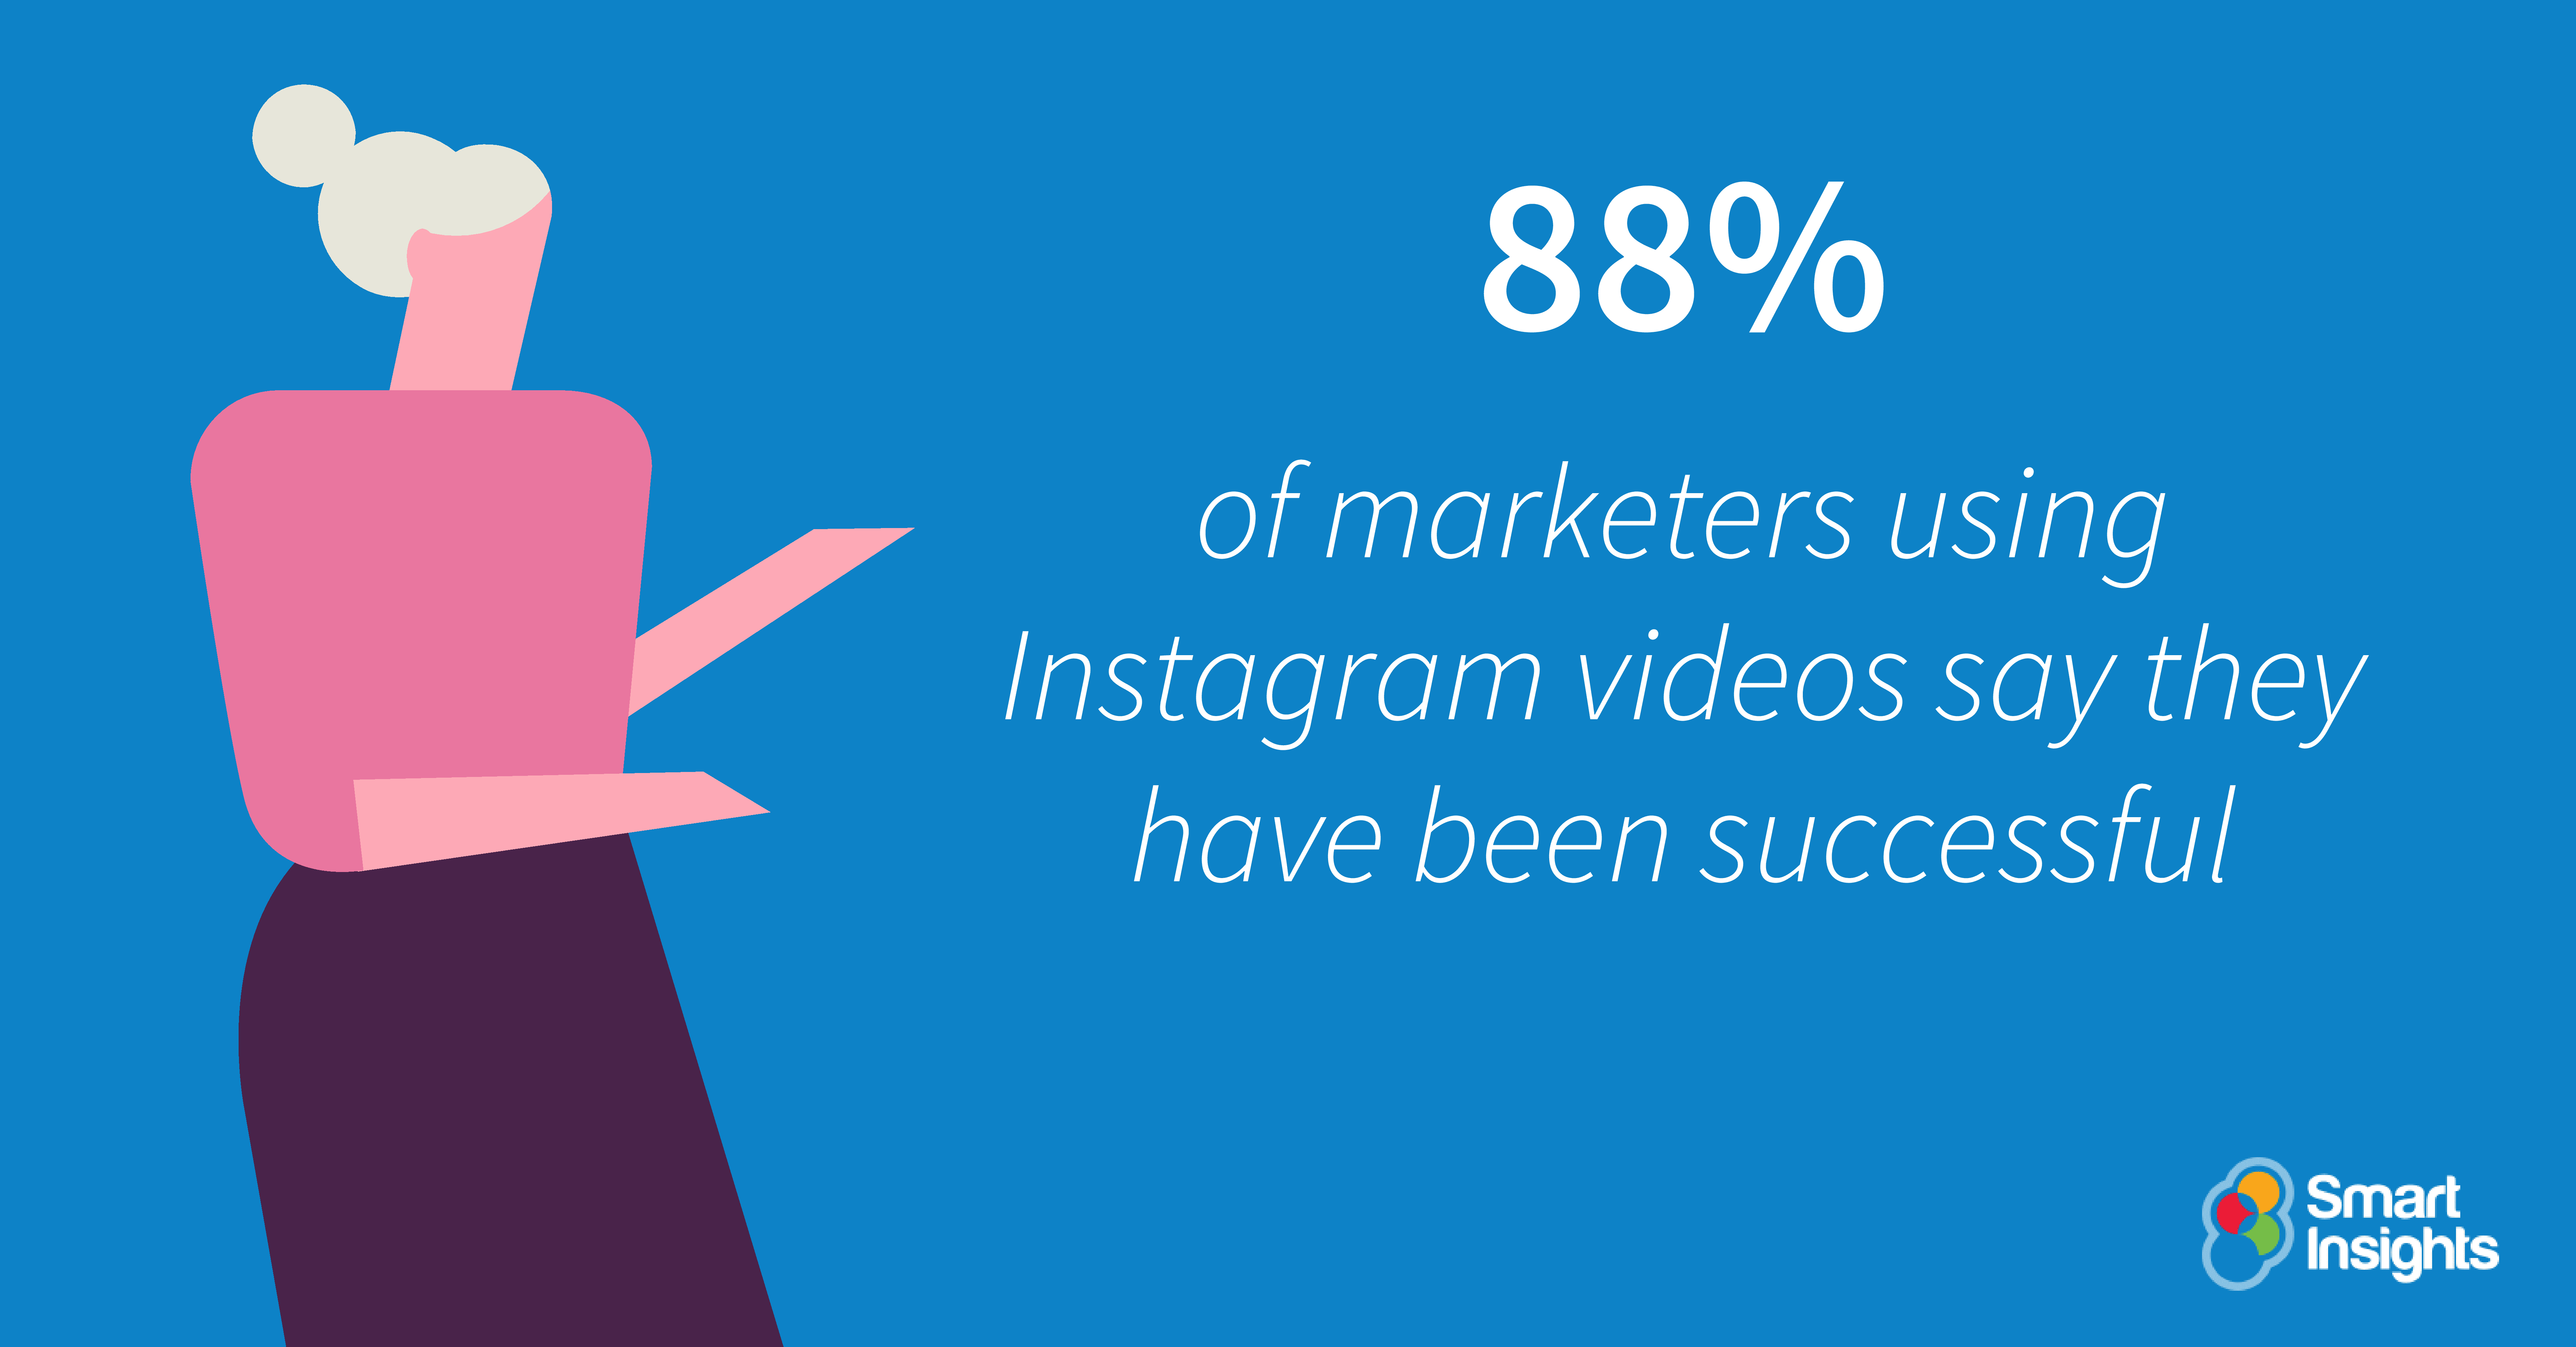 88% of marketers using Instagram videos say they have been successful